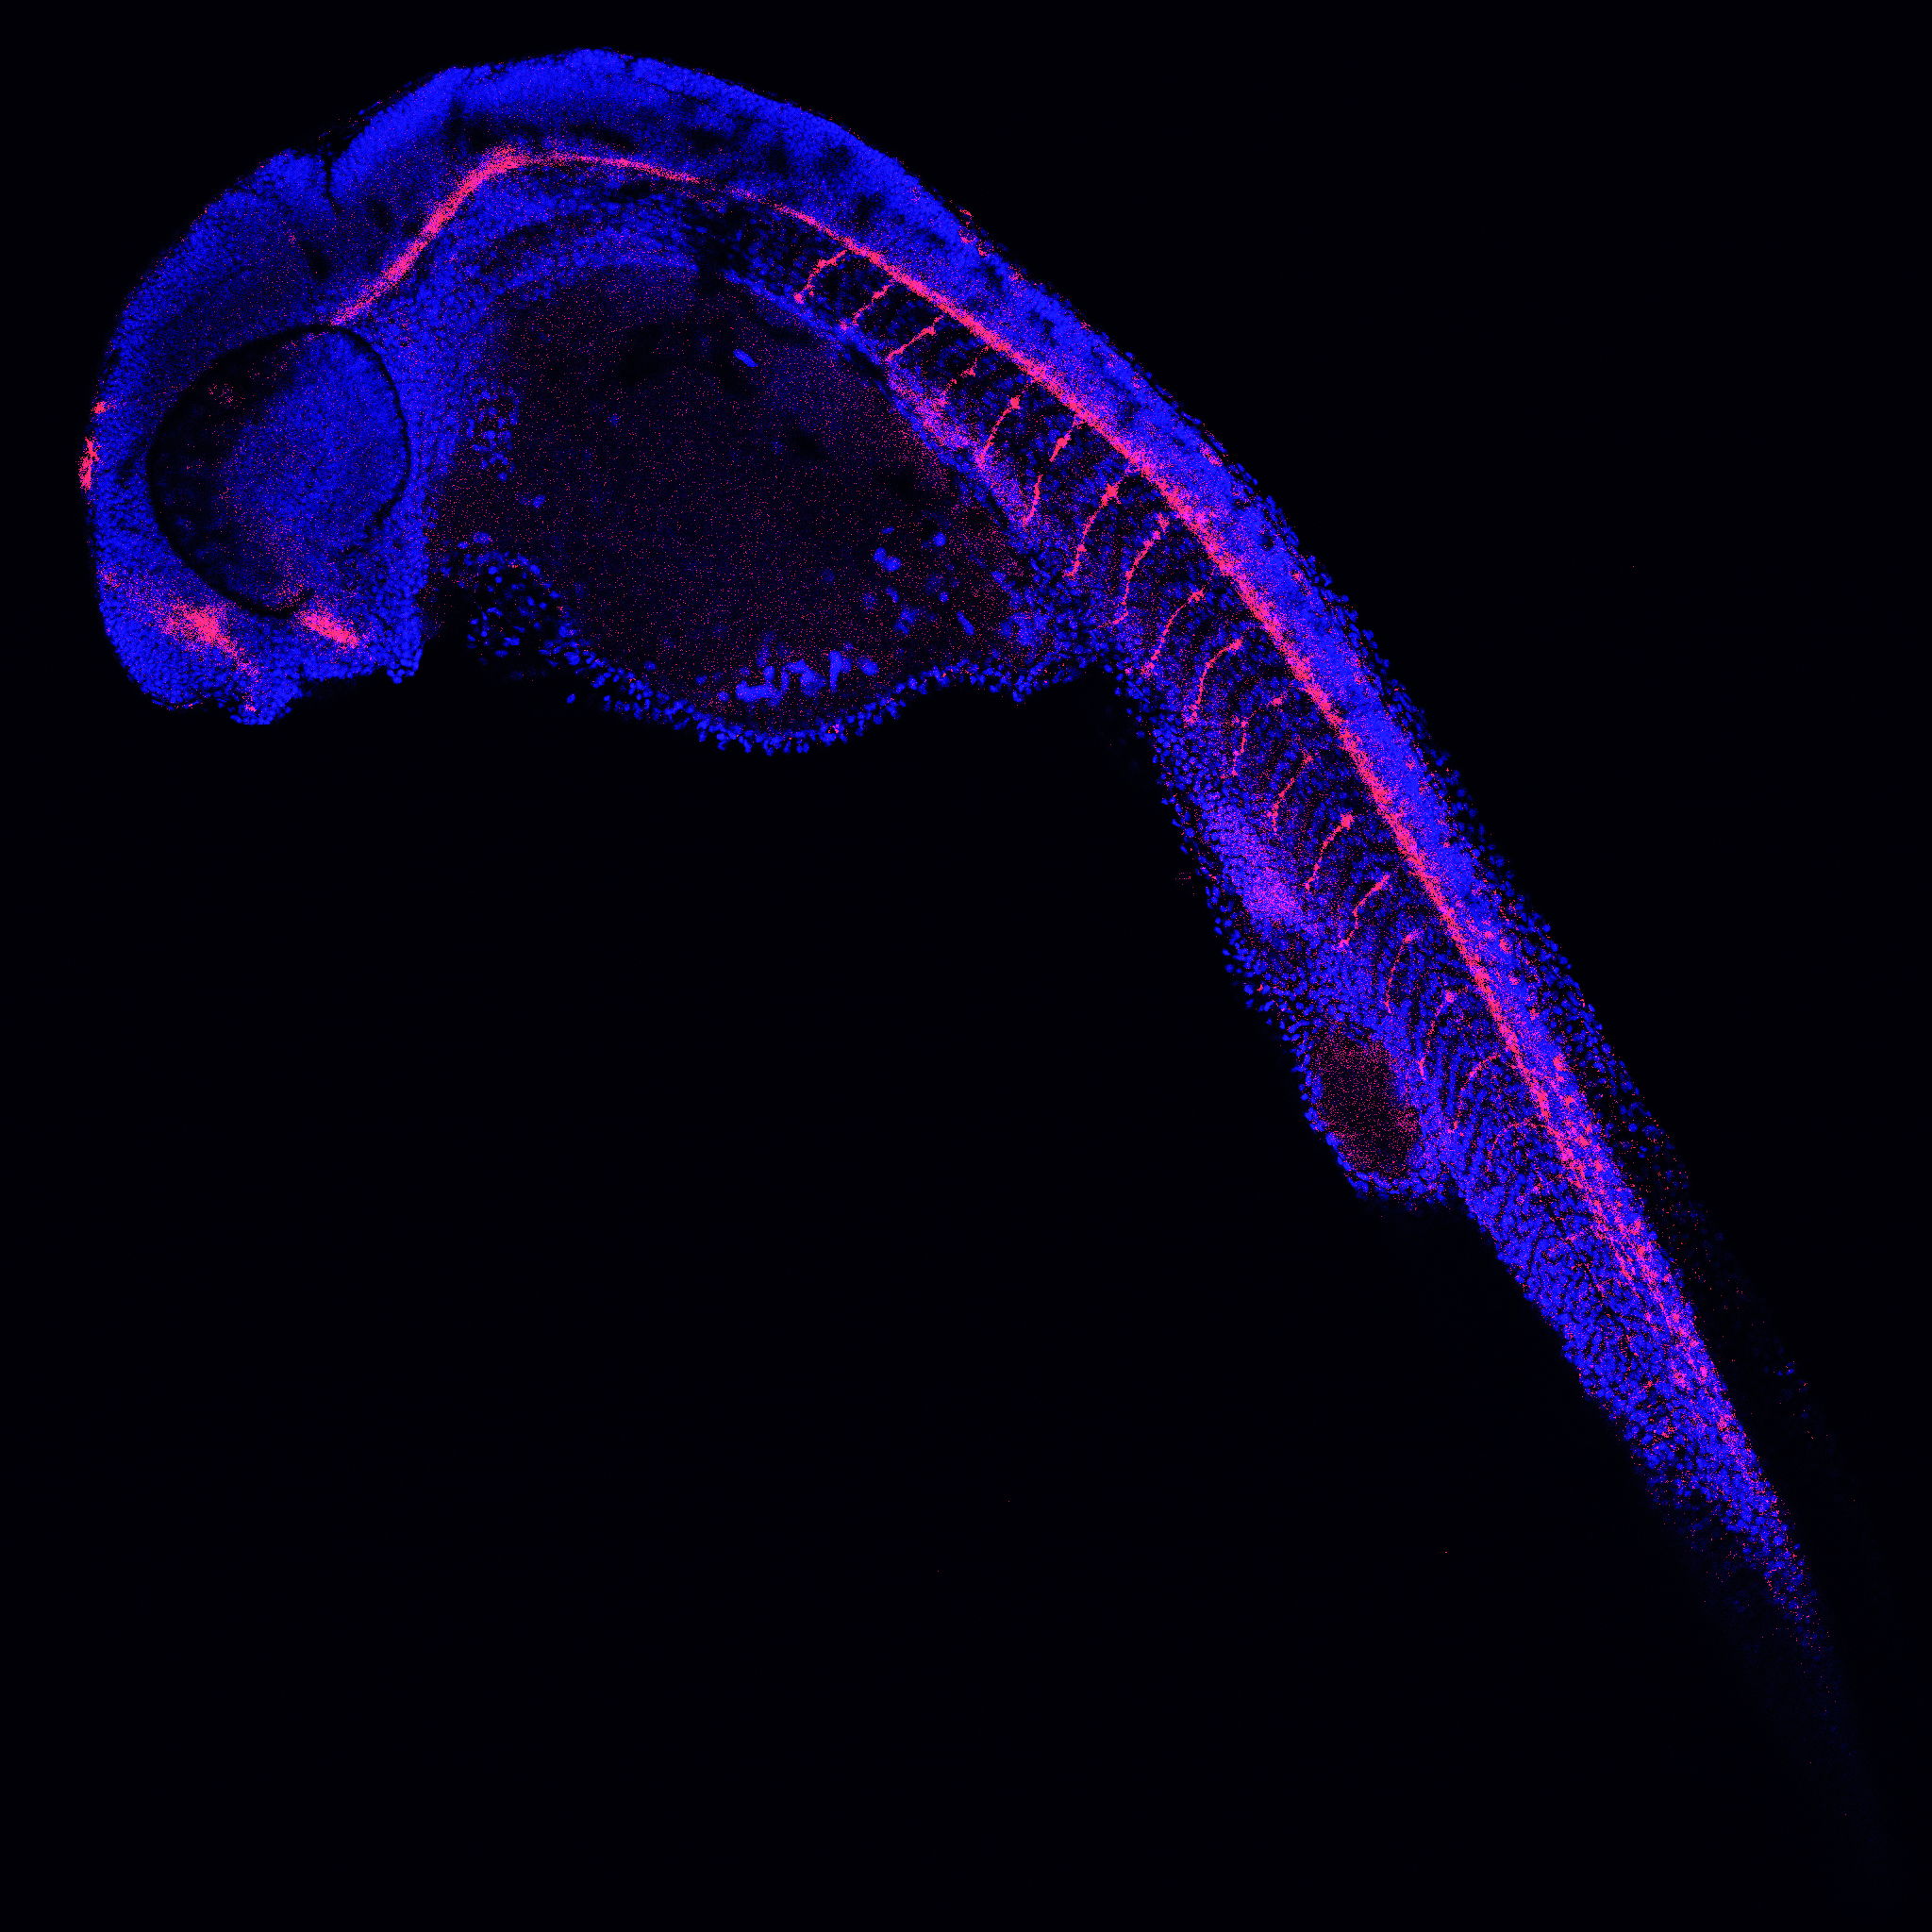 Fluorescent neuronal staining in zebrafish embryo (nuclei in blue, axons in red)